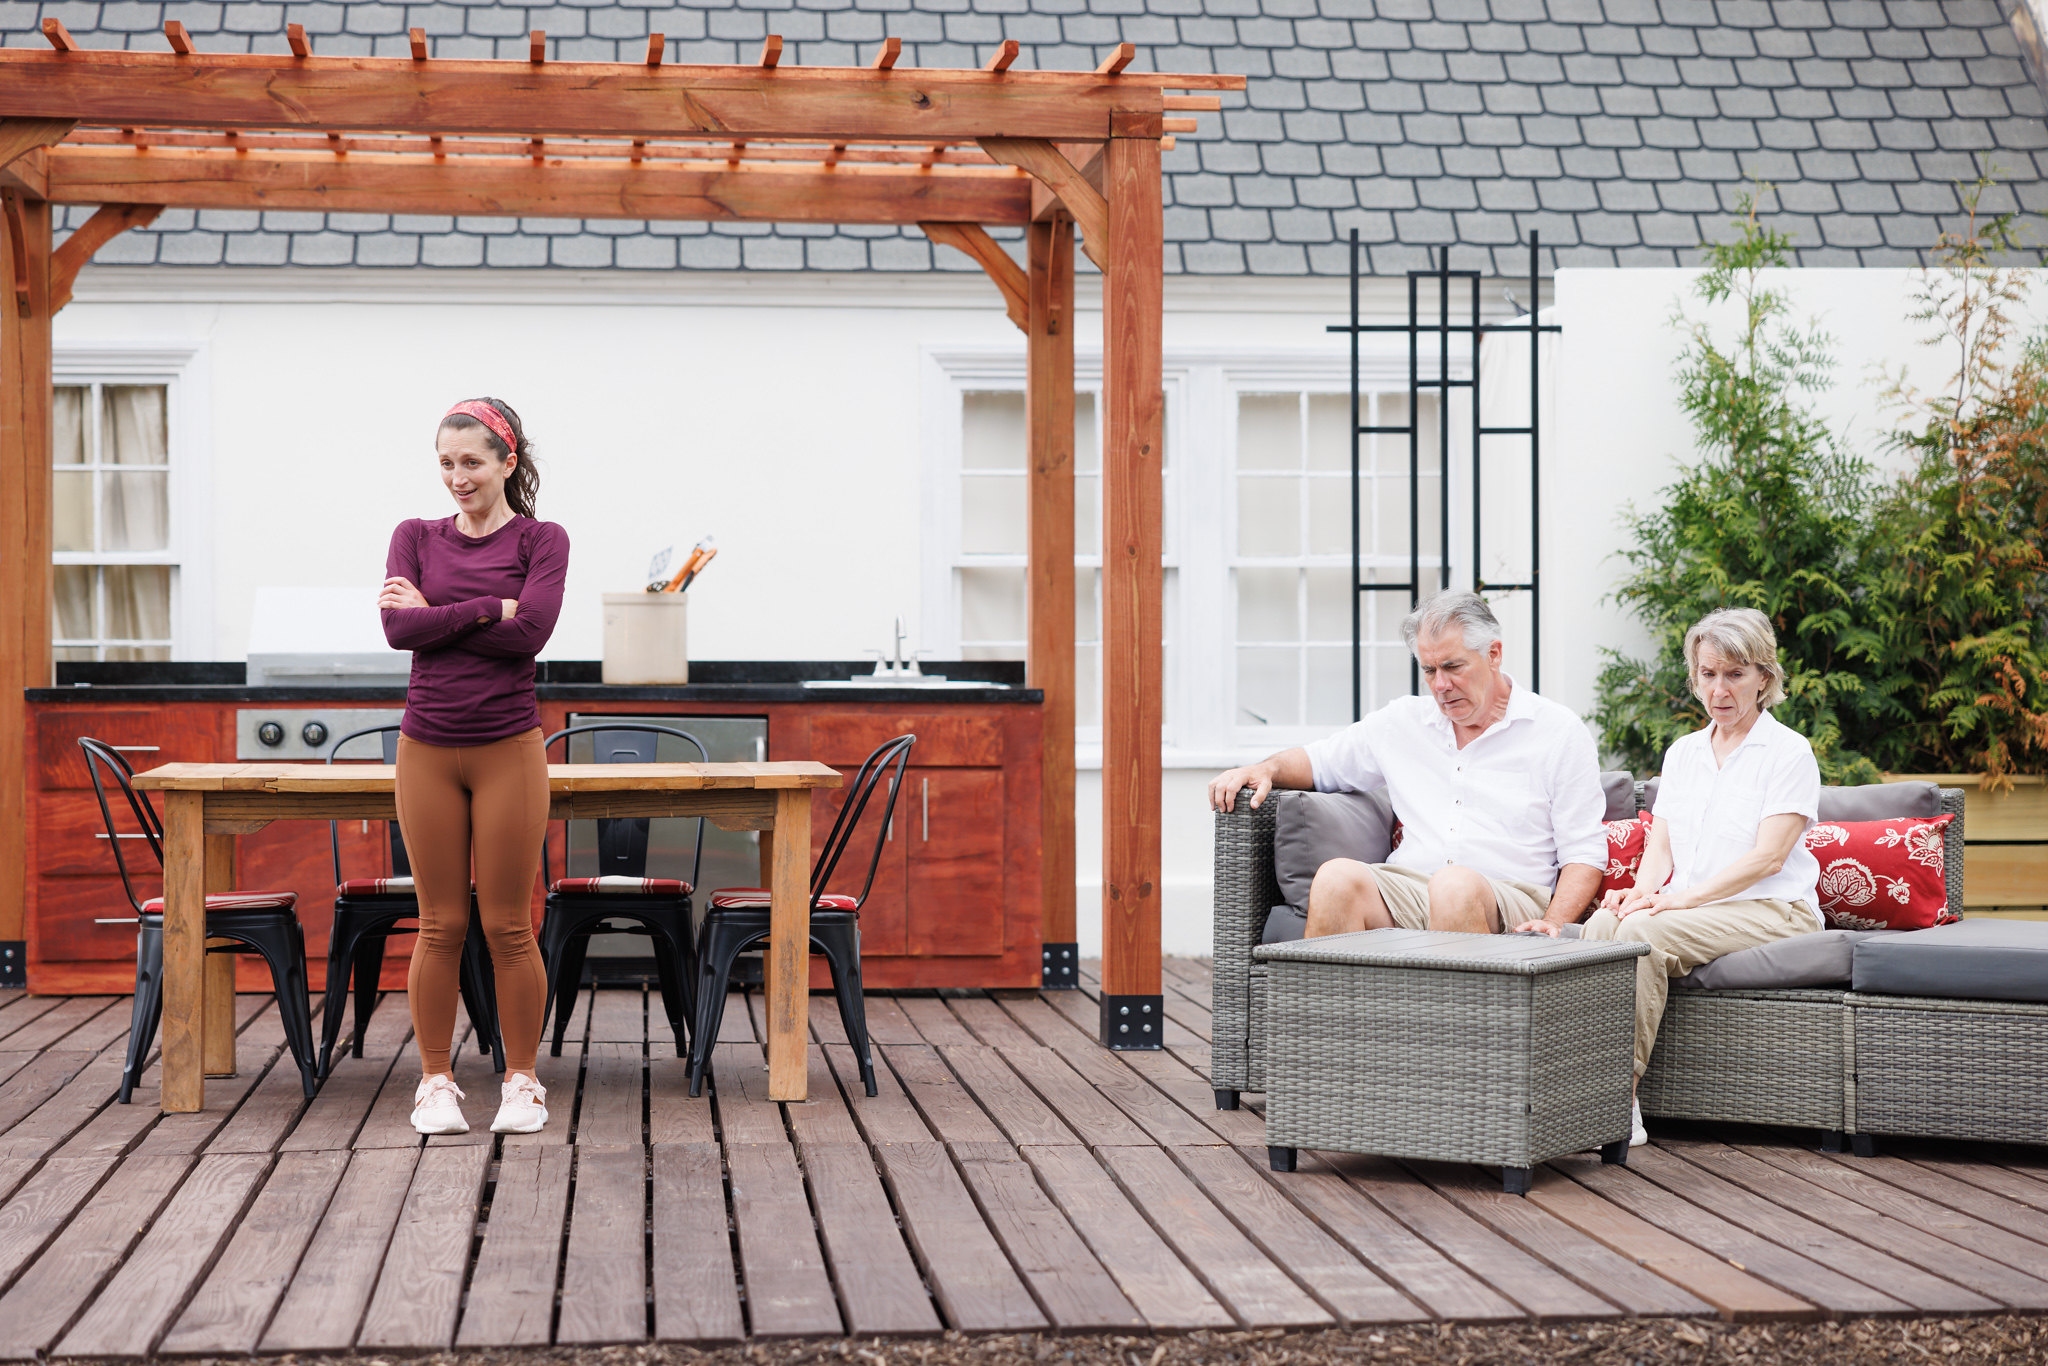 Alt text: Caroline Calkins, as Wren in "A Body of Water," stands with her arms crossed and a thoughtful expression in front of a wooden table on an outdoor deck. She is dressed in a long-sleeved maroon top and light brown leggings. To the right, Kevin O'Rourke and Bella Merlin, portraying Moss and Avis, sit on a wicker couch with red floral cushions. They both wear white shirts and beige shorts, looking down contemplatively. The background shows part of the house, an outdoor kitchen area, and greenery, suggesting a serene yet tense scene from the play.